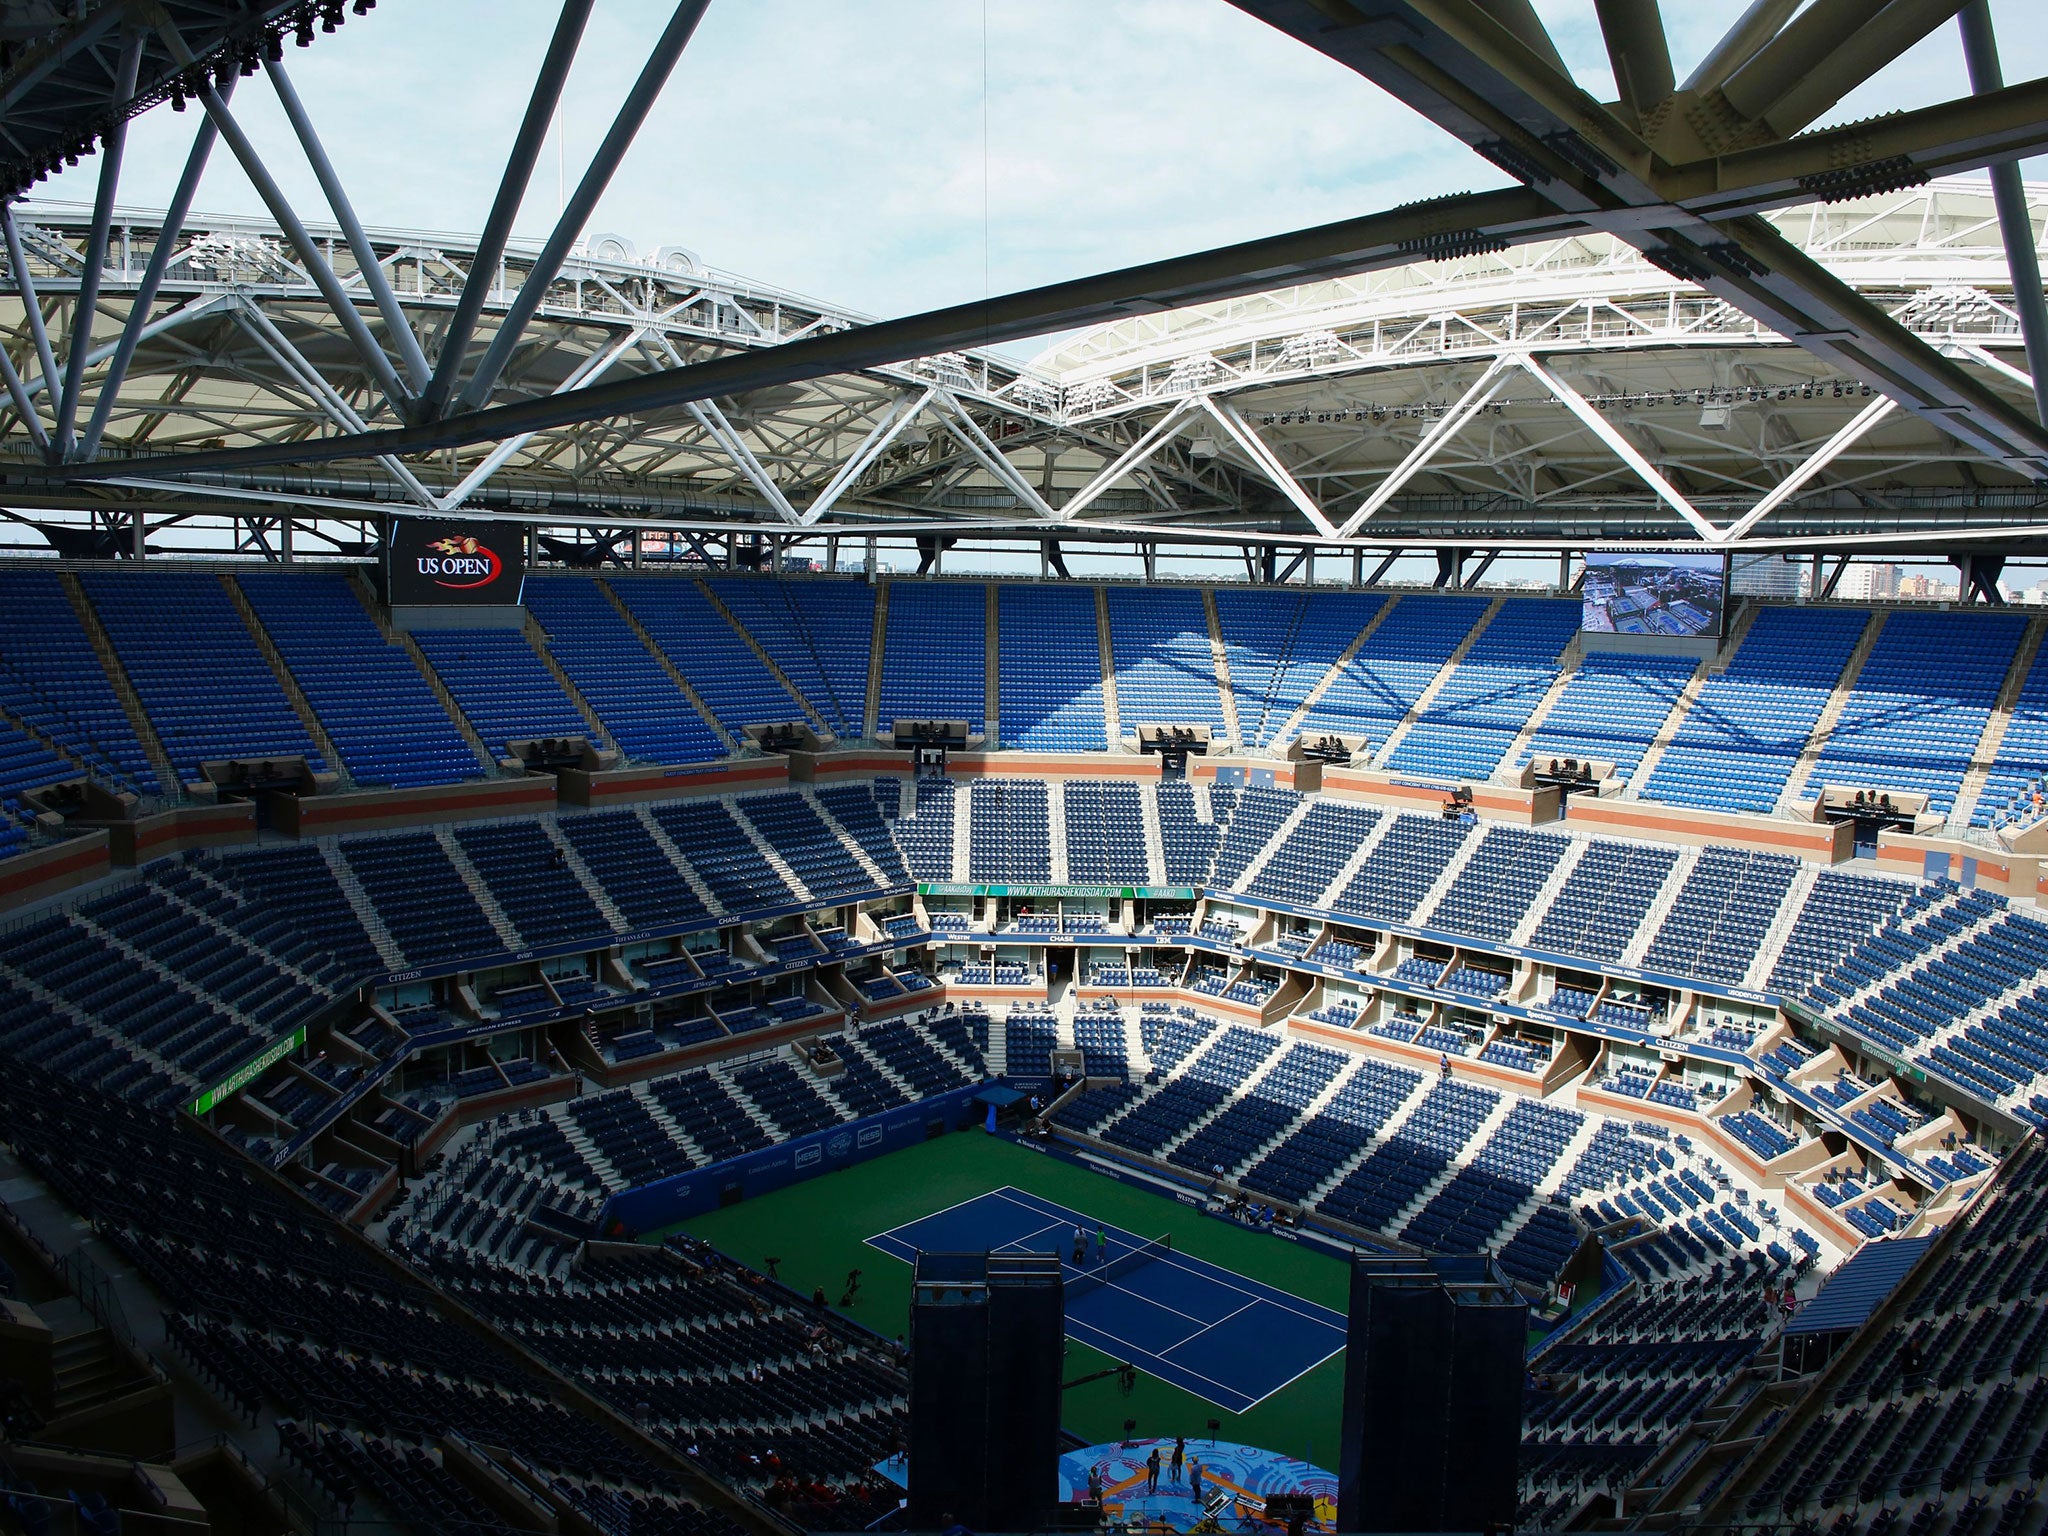 The Arthur Ashe court at Flushing Meadow with new retractable roof